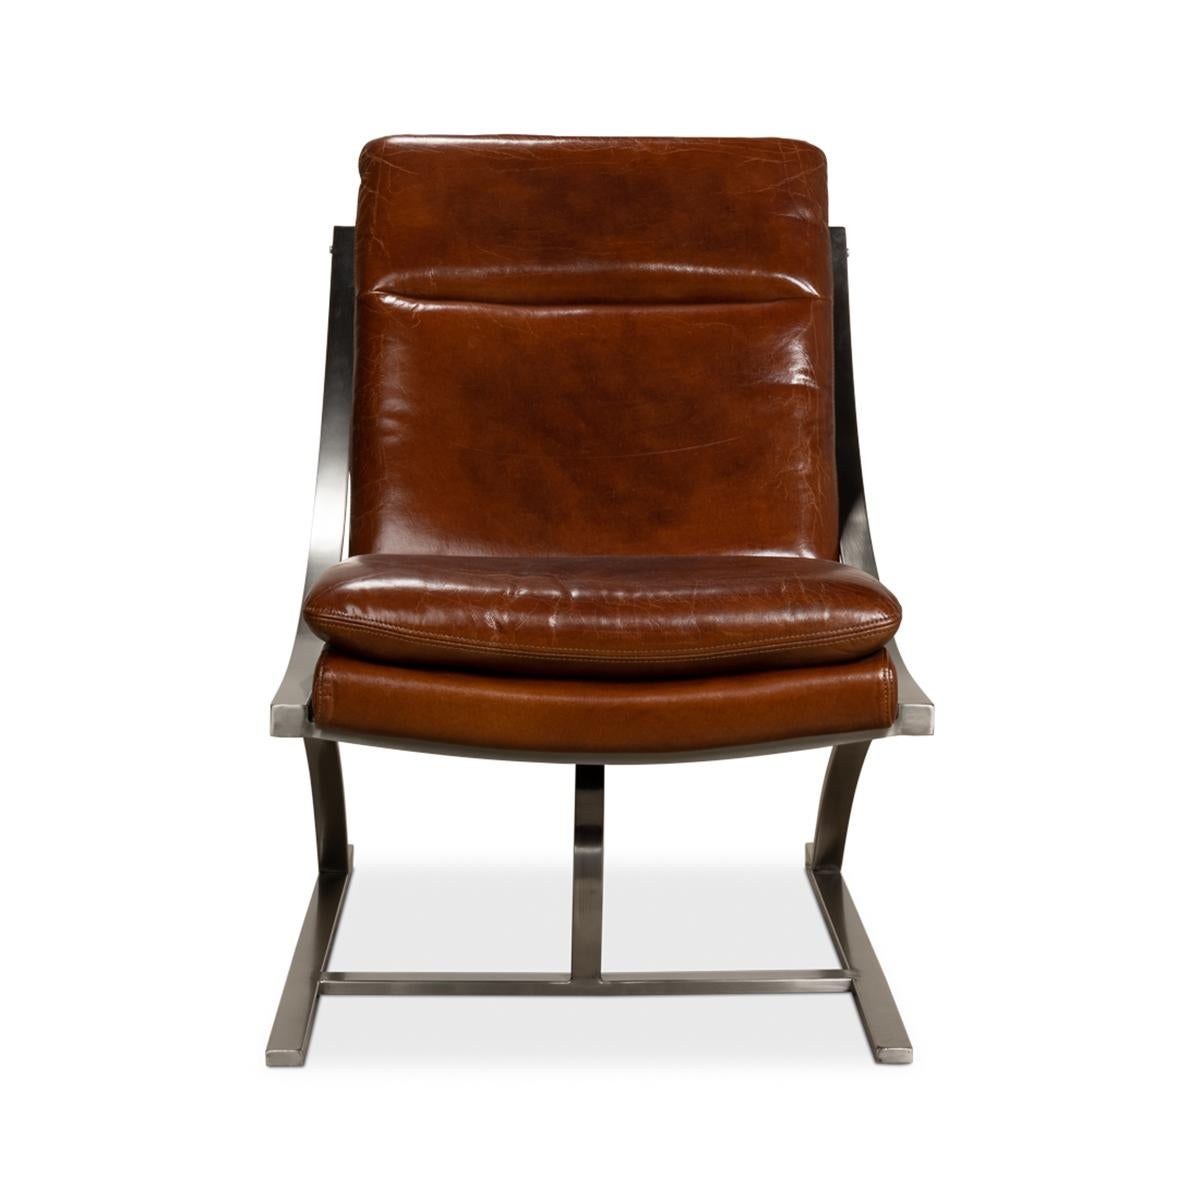 Modern stainless steel and leather chair, warm luxurious brown leather with a brushed stainless steel frame and a clean and contemporary design. 

Crafted of pure aniline top-grade leather in 